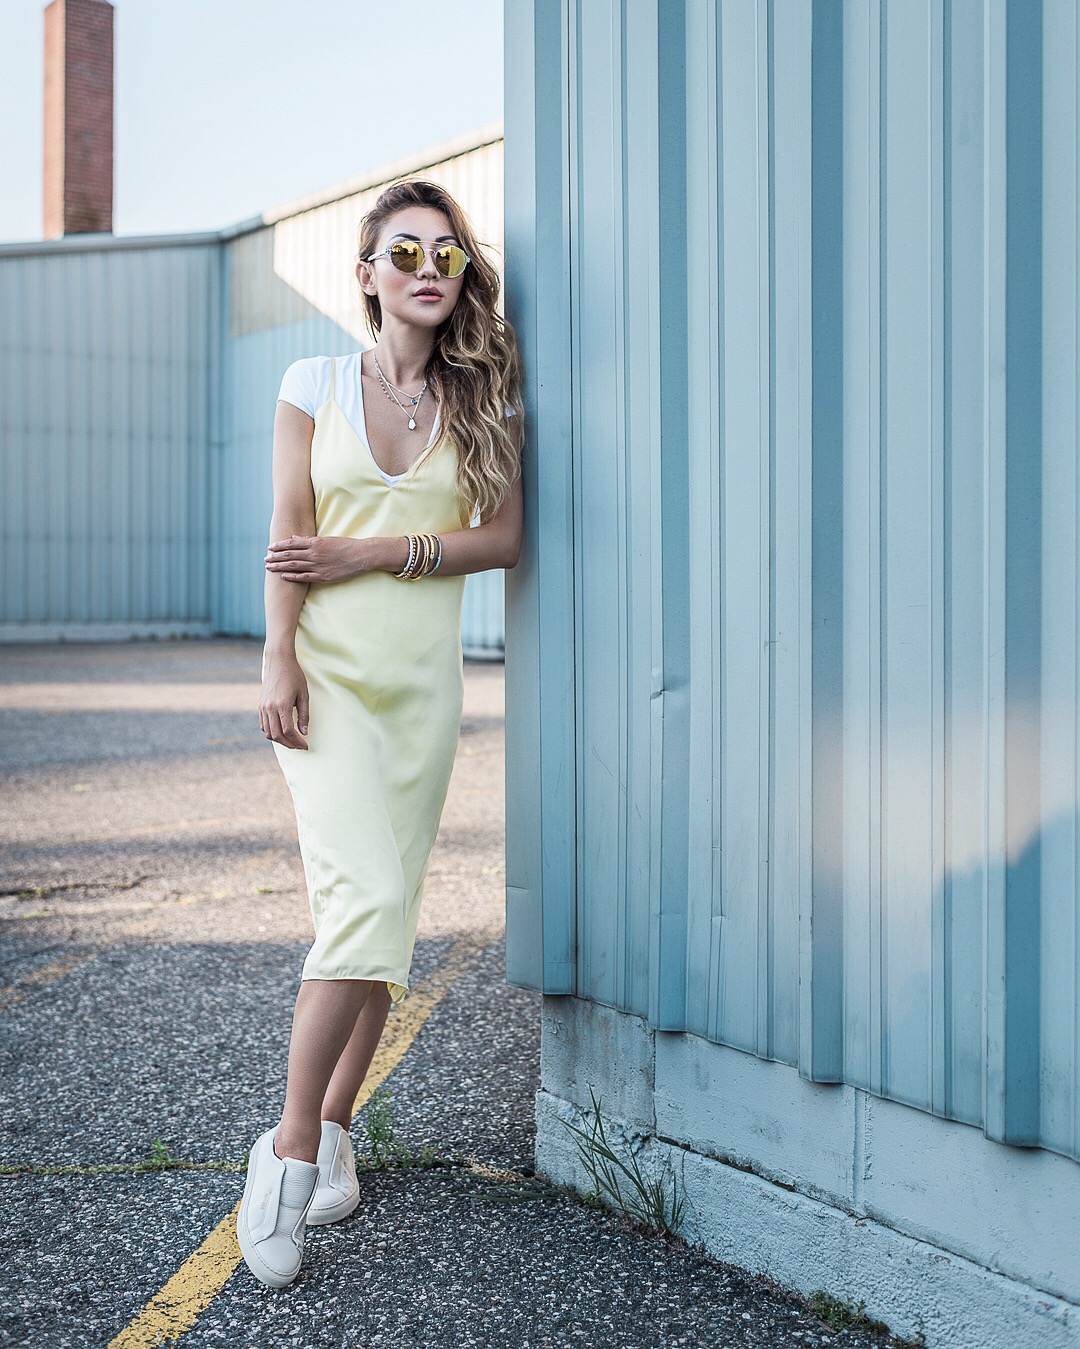 Slip Dress and Shirt - Ultra Chic On-The-Go Styles For Every Girl // NotJessFashion.com